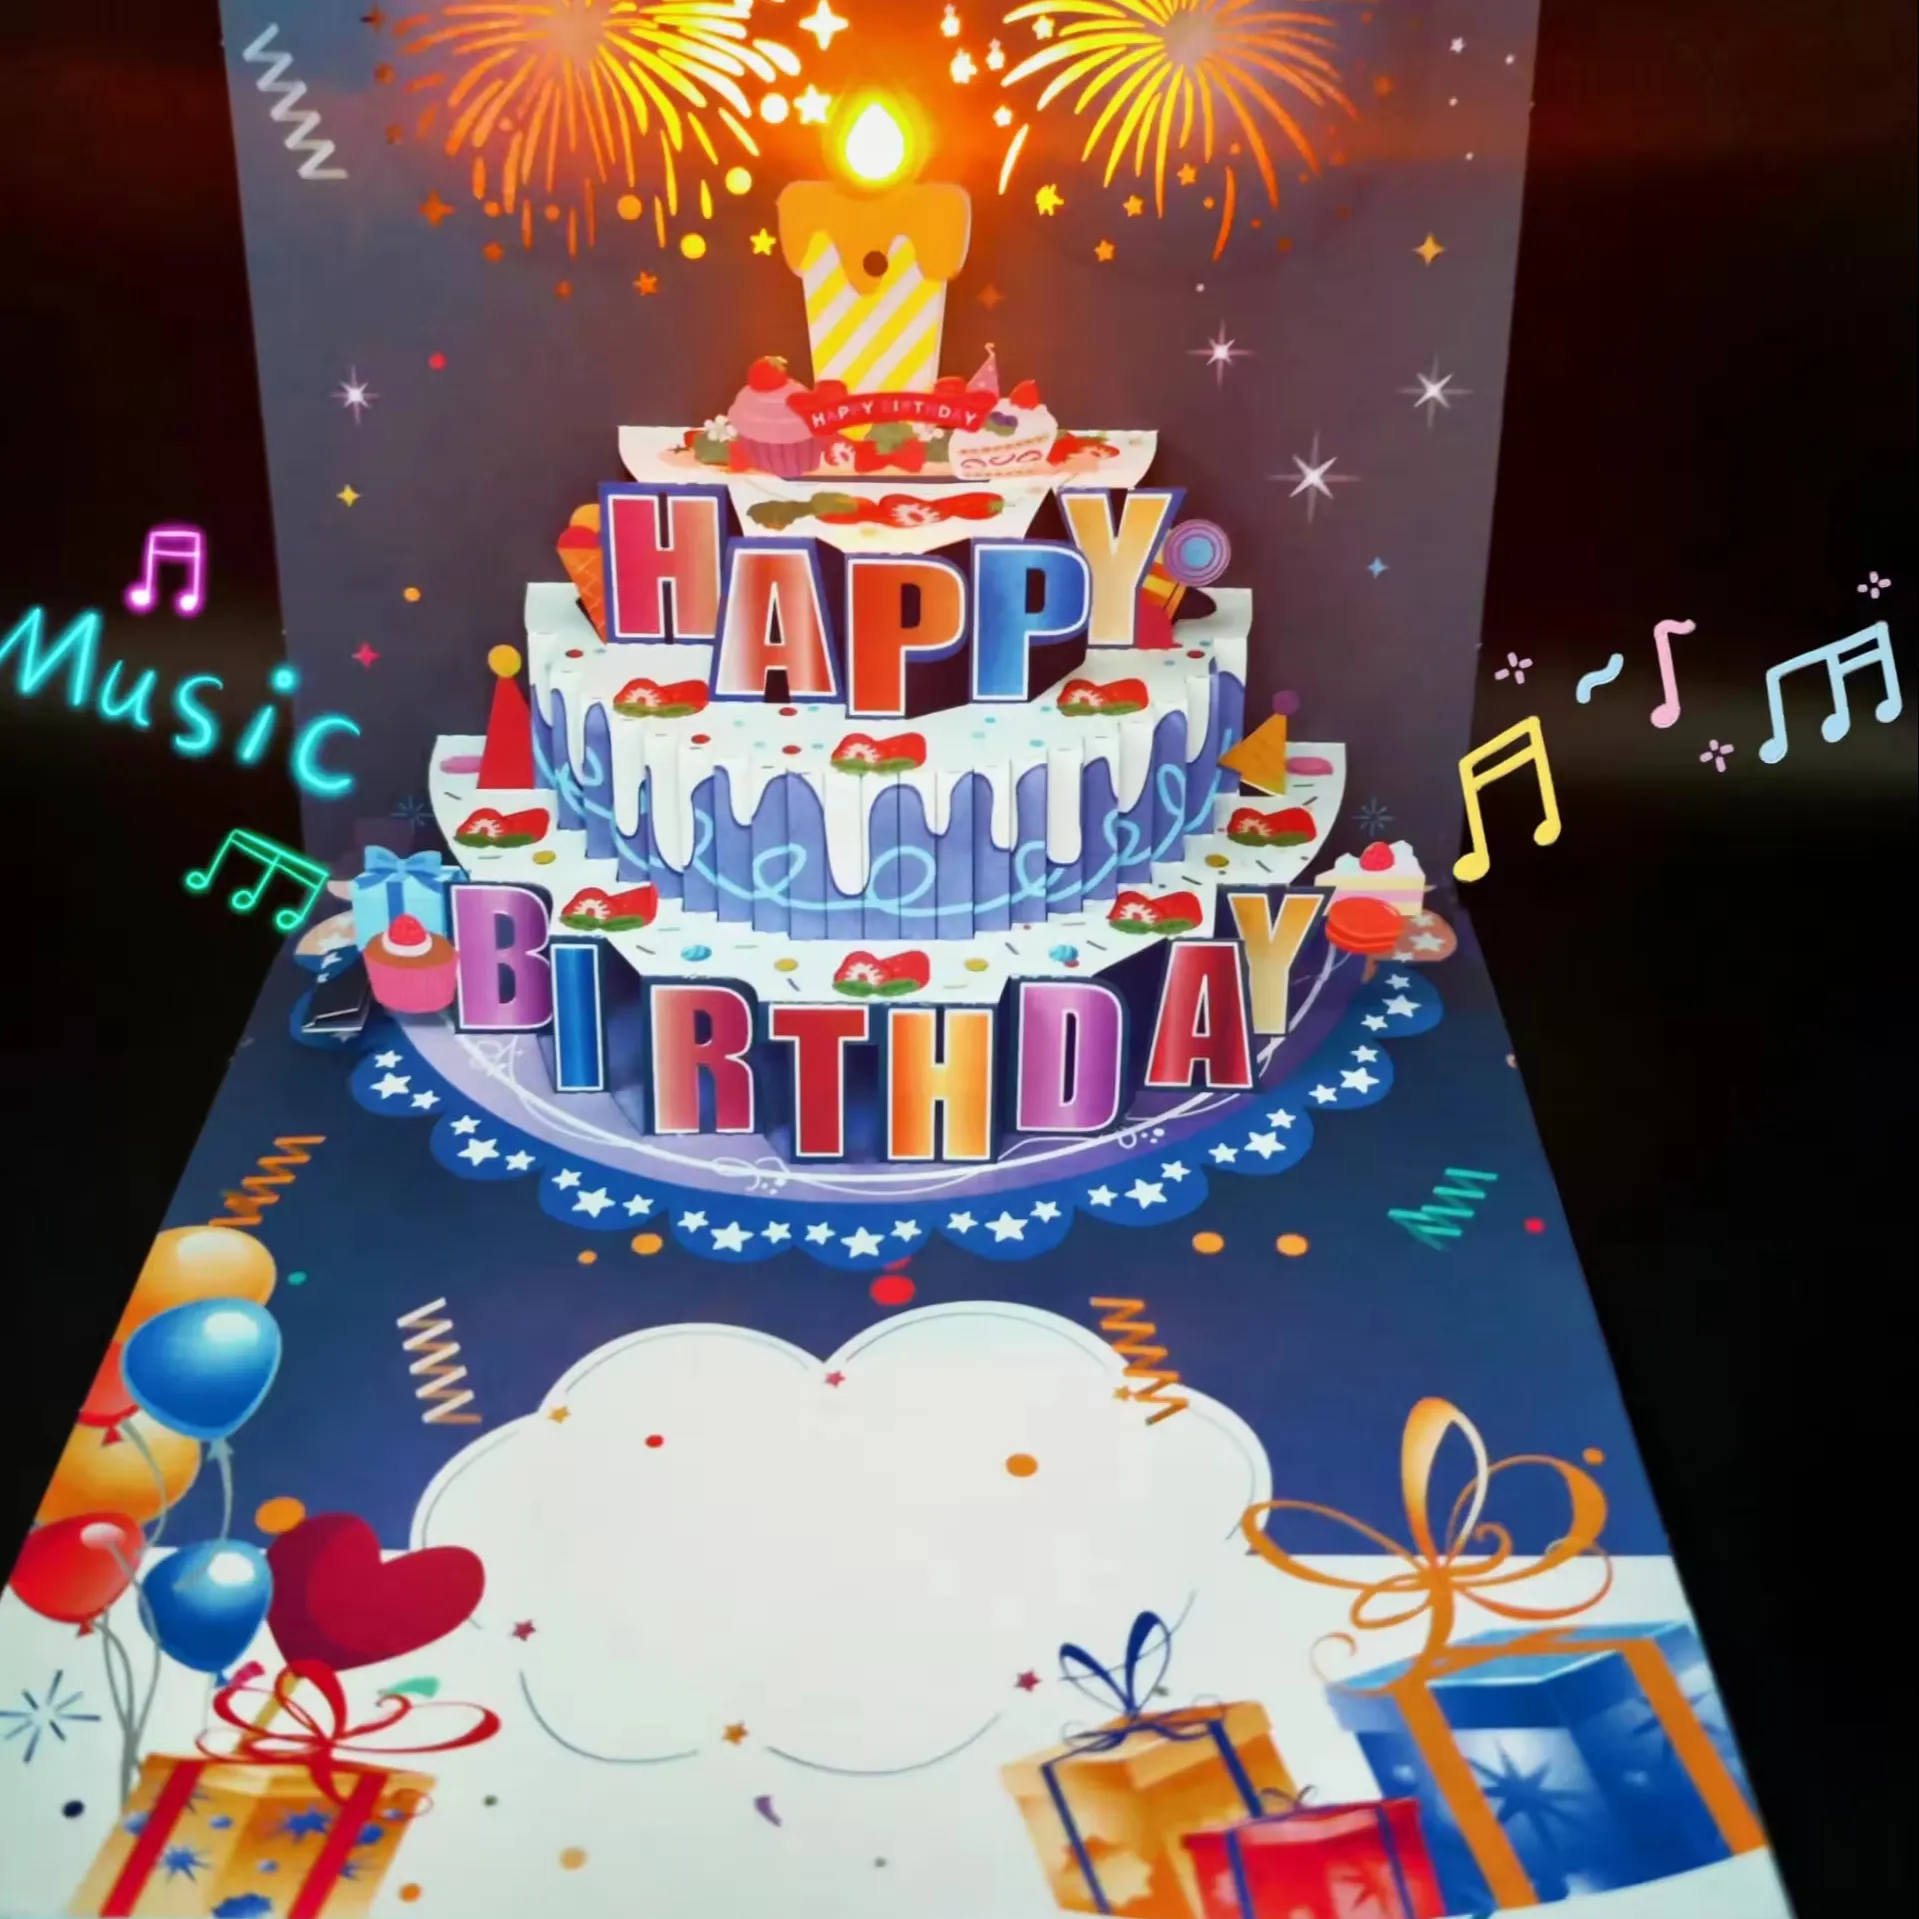 Fireworks pop-up cake light music greeting card Happy birthday greeting card can blow LED candles